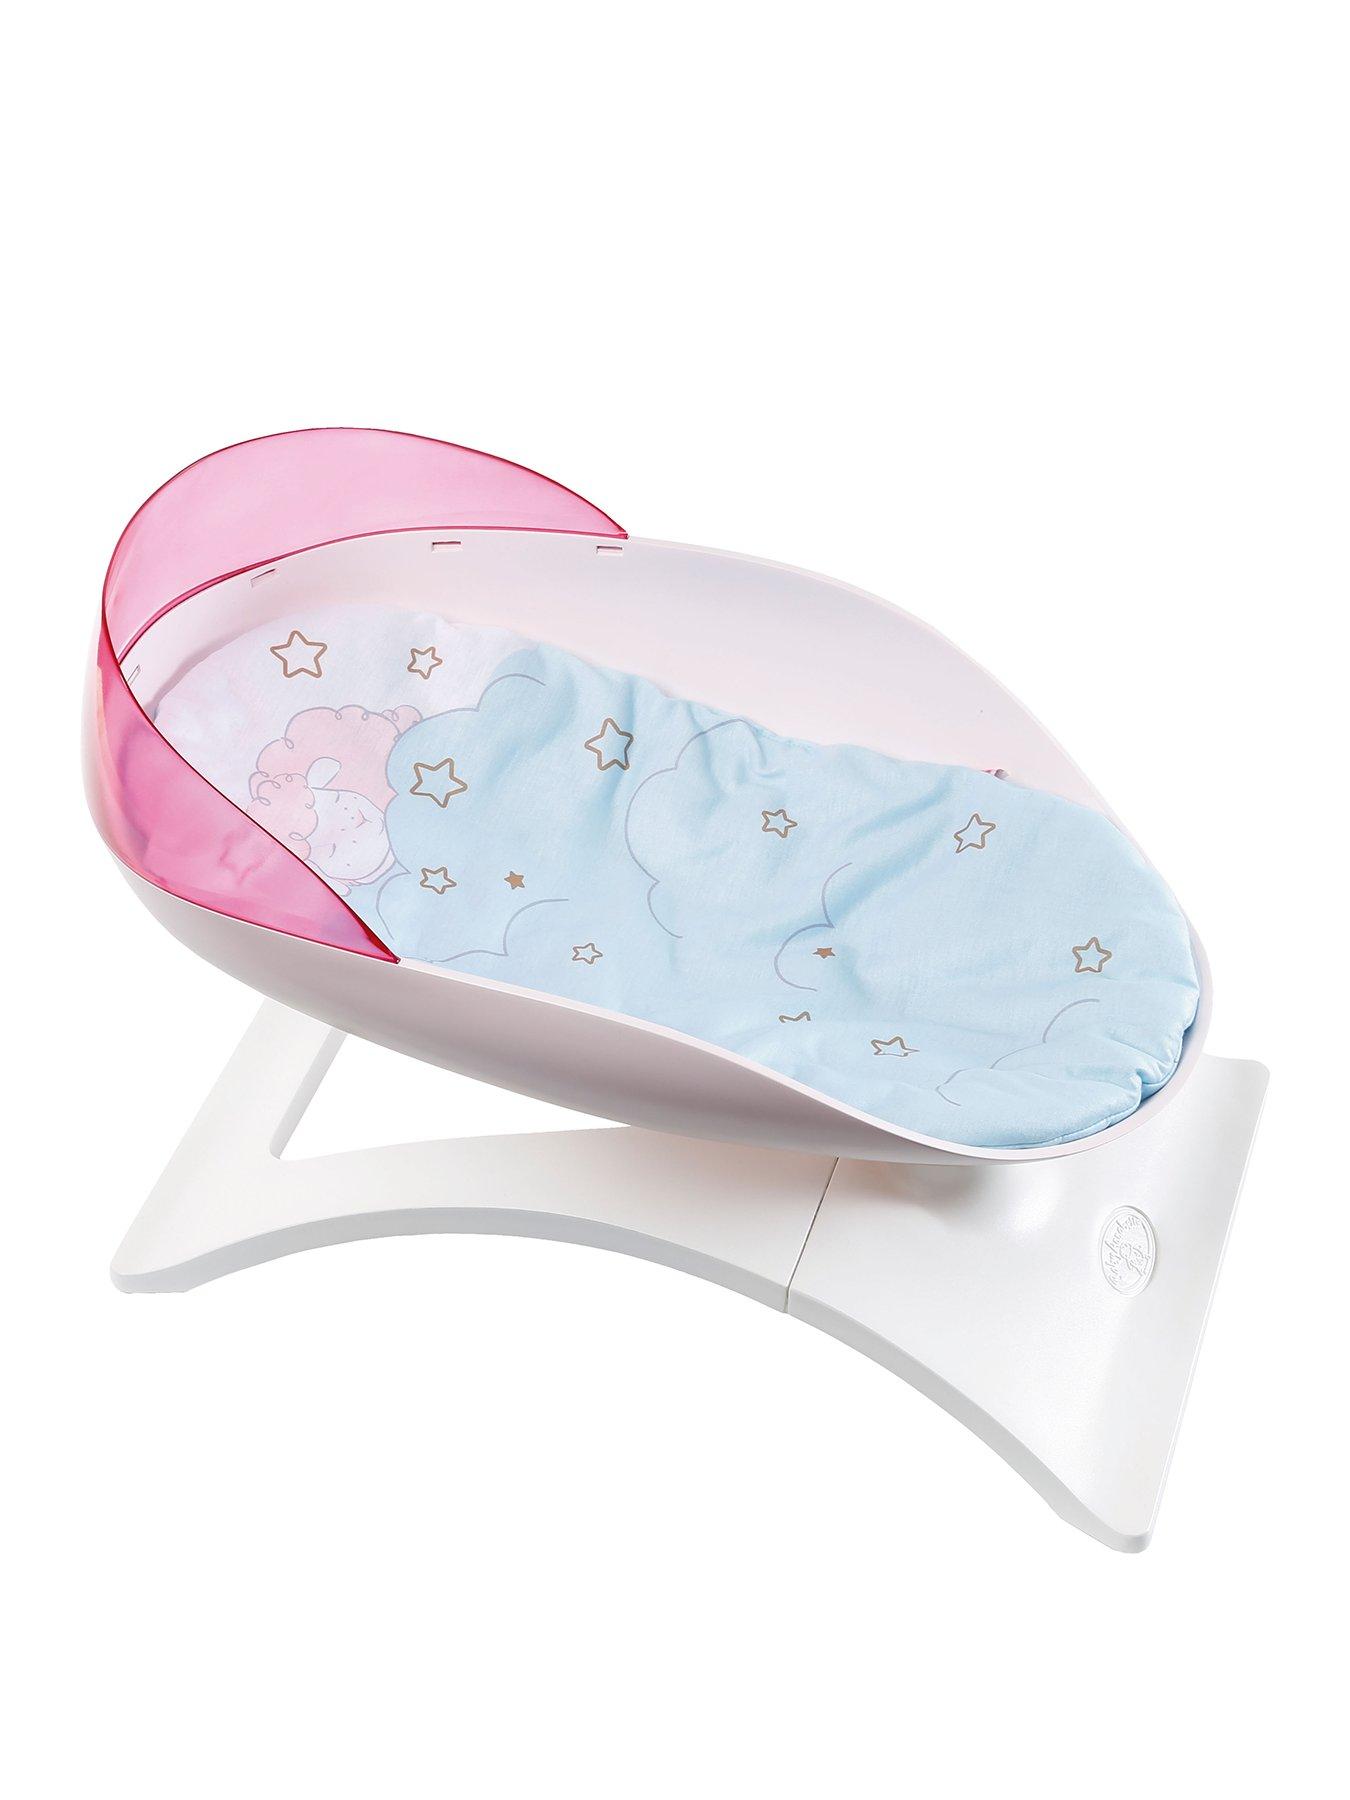 baby annabell rocking cradle